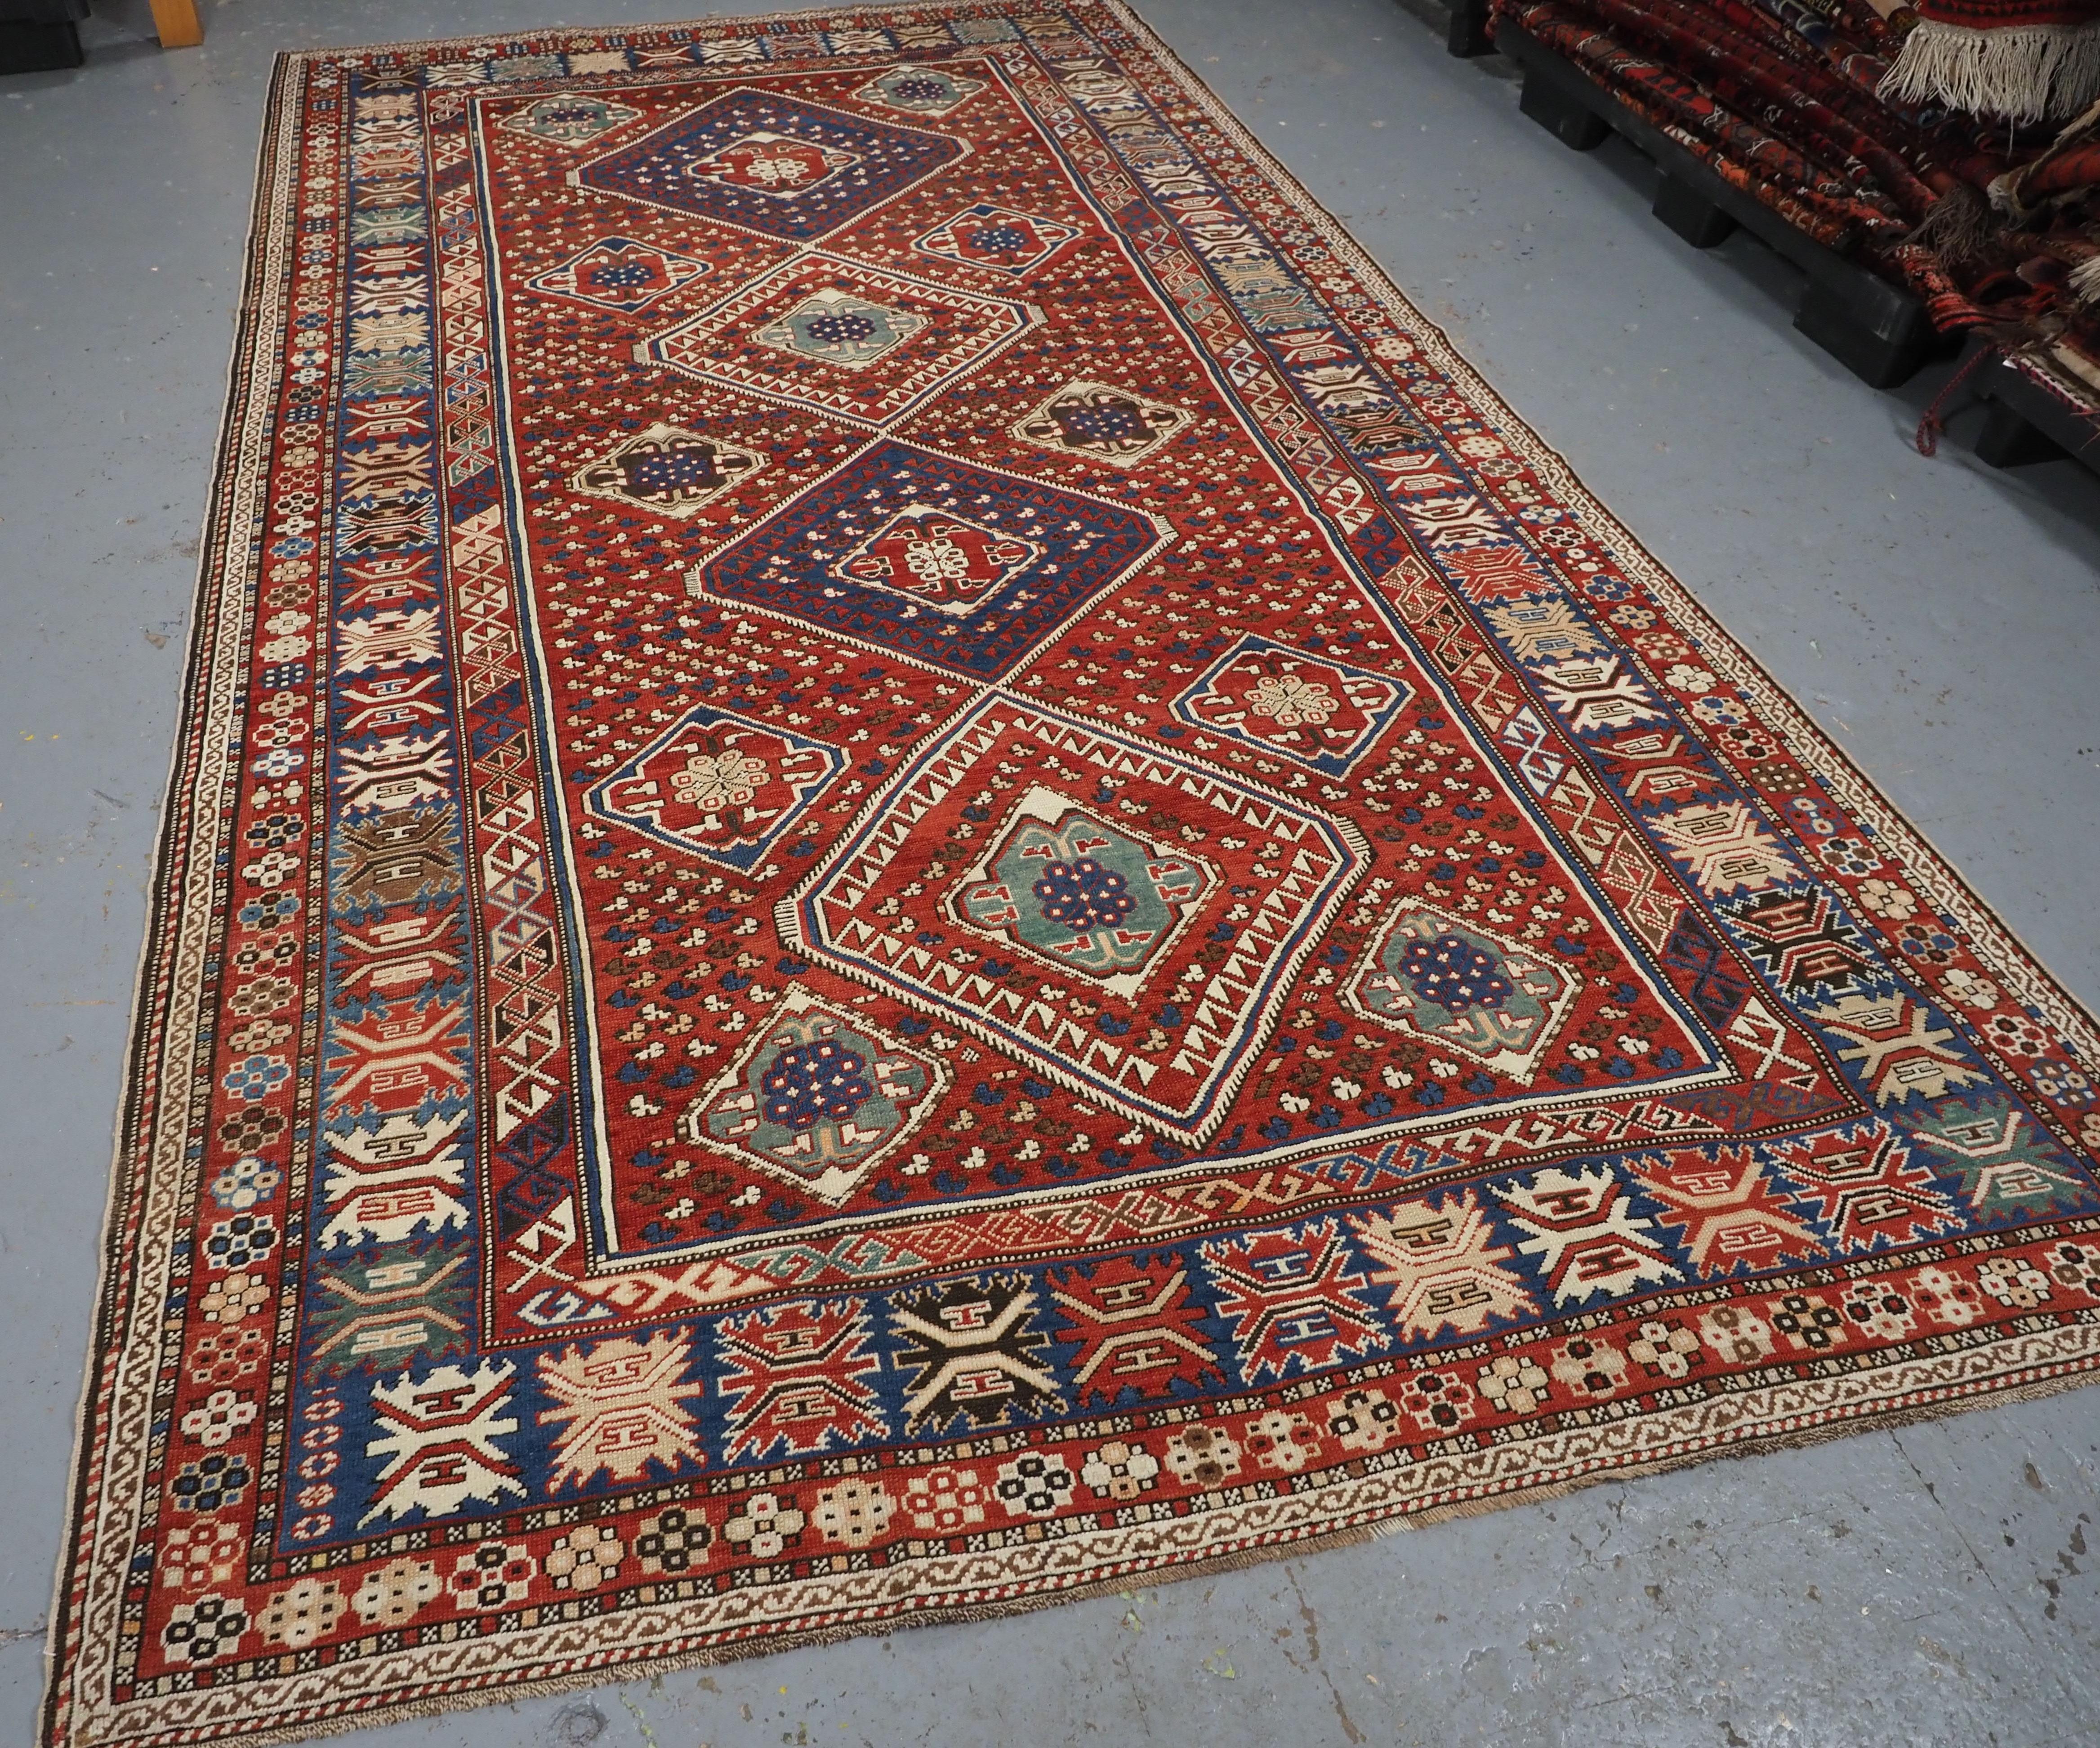 Size: 10ft 11in x 6ft 0in (332 x 184cm).

Antique Caucasian Khila rug from the Baku region of the Eastern Caucasus.

Circa 1890.

This is an outstanding example of this type of rug, with four large diamond medallions on a madder red ground. The